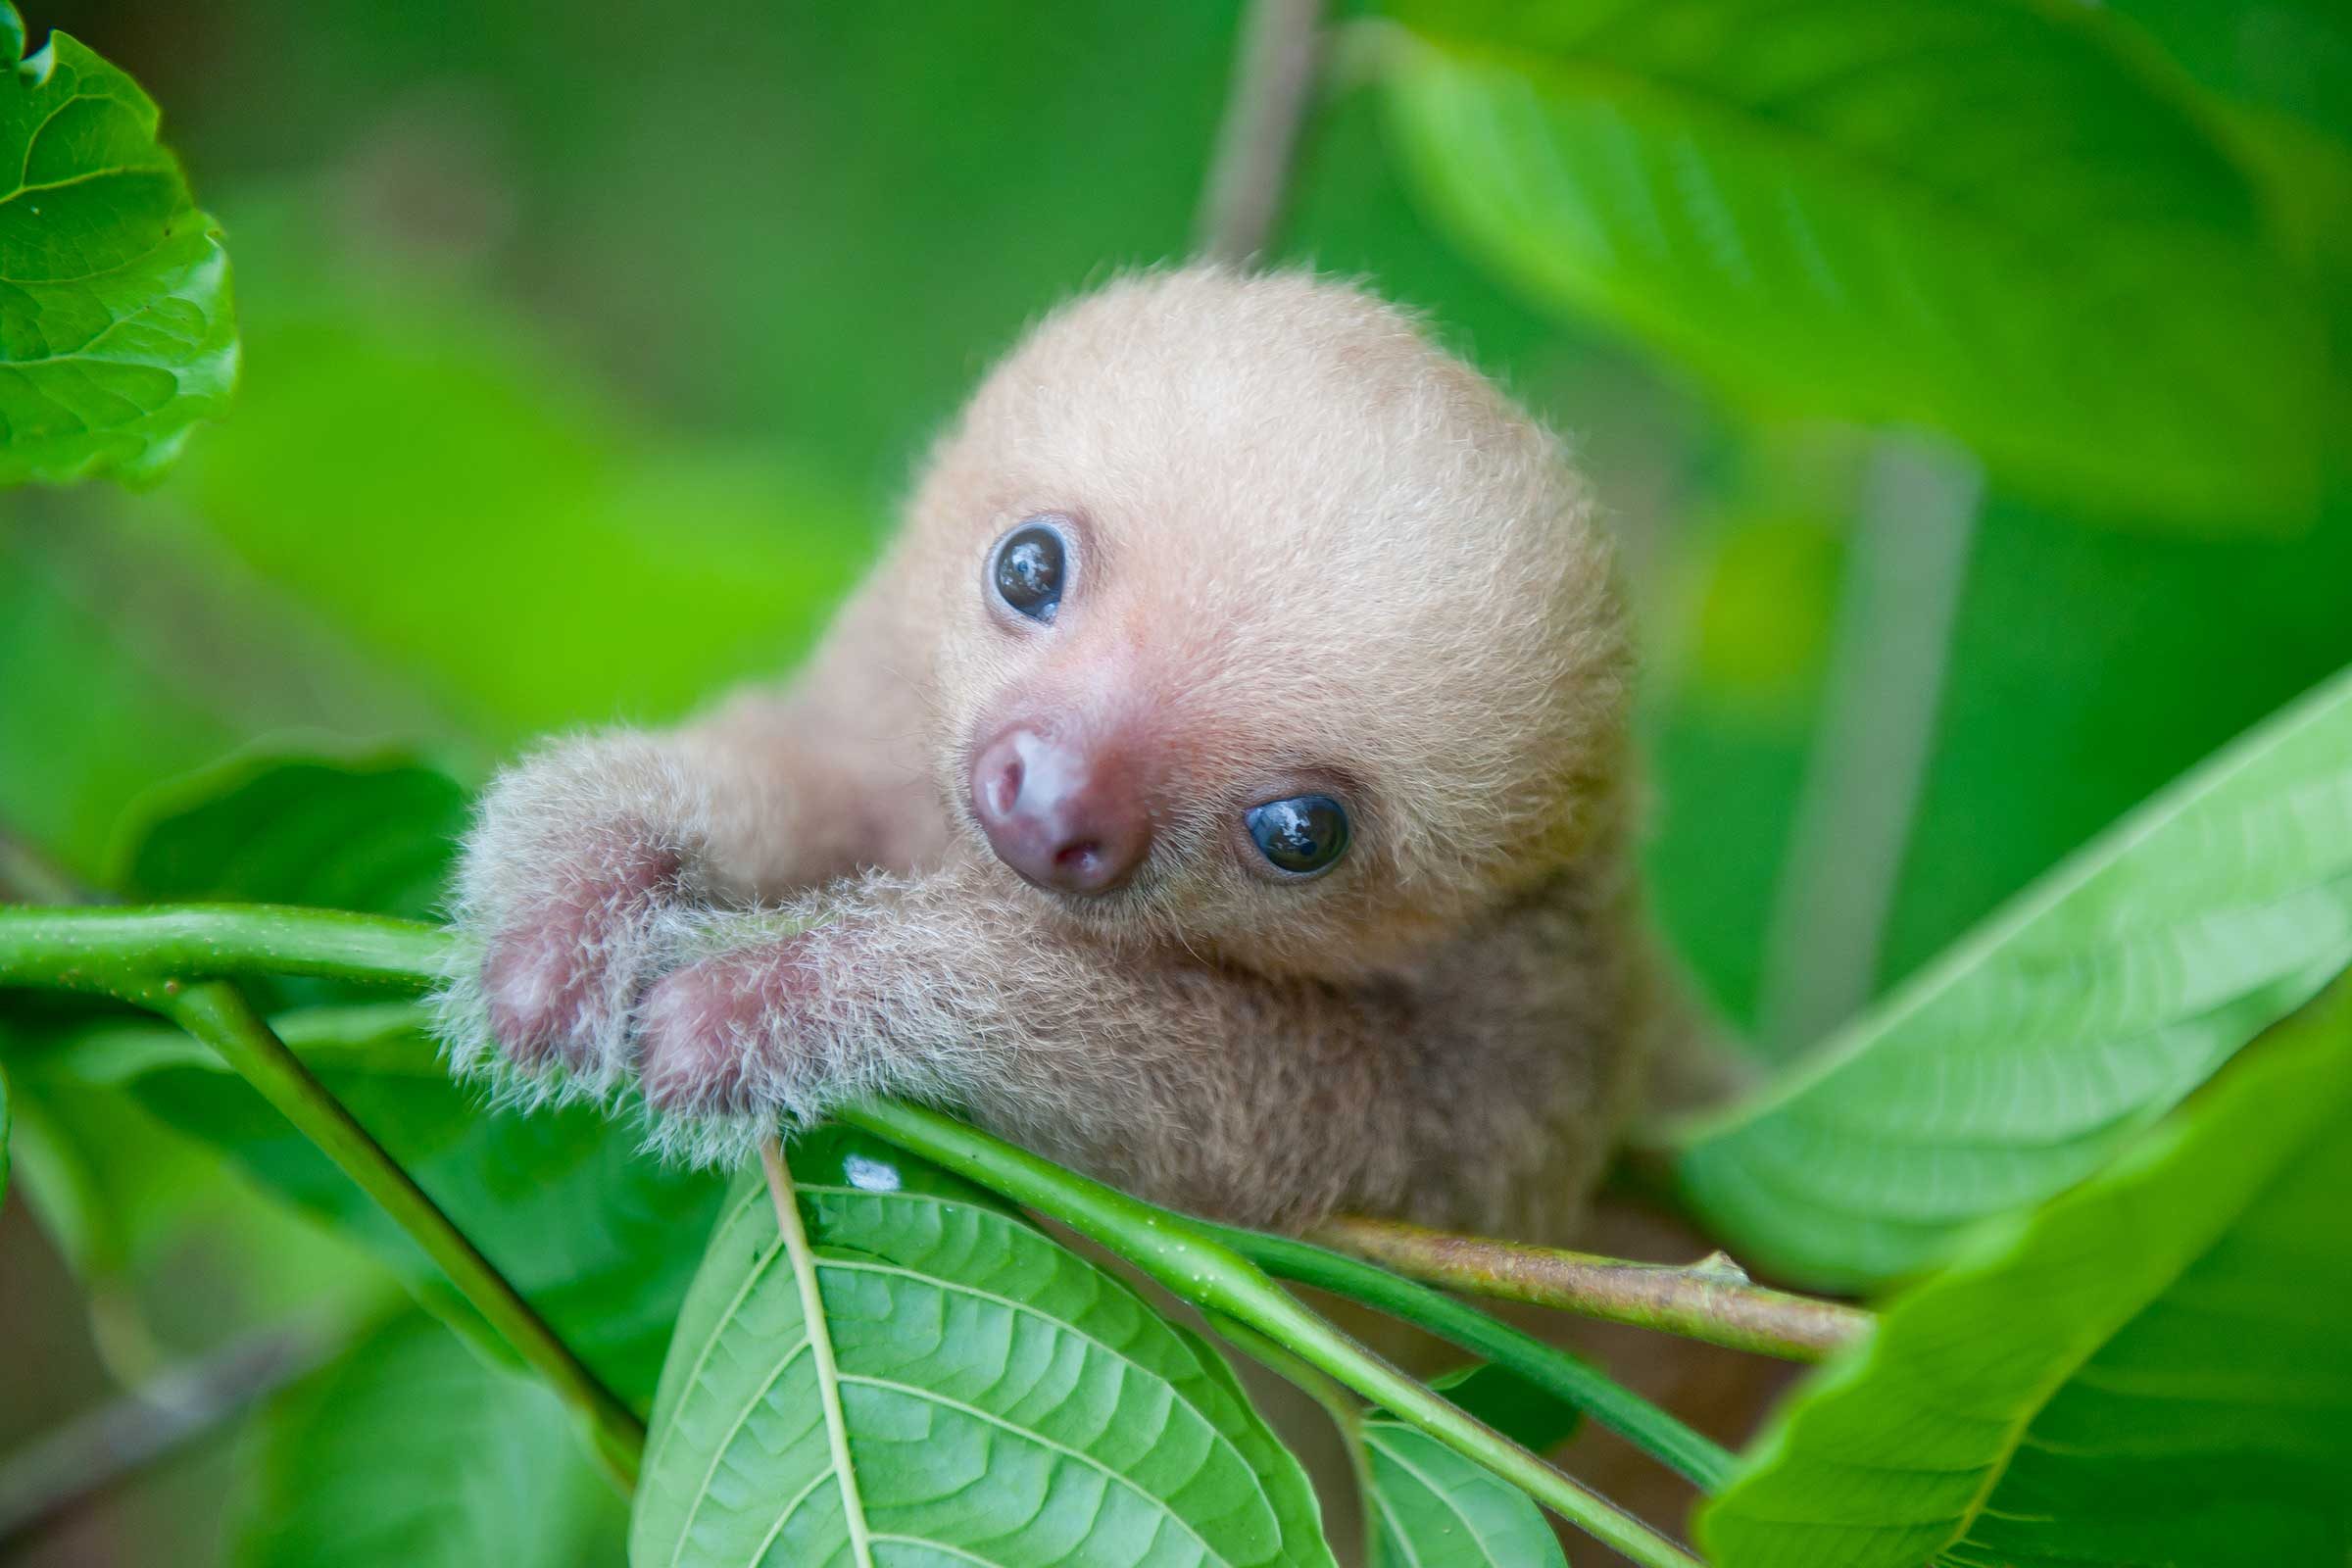 Cute Sloth Pictures: Adorable Photos of Sloths | Reader's Digest